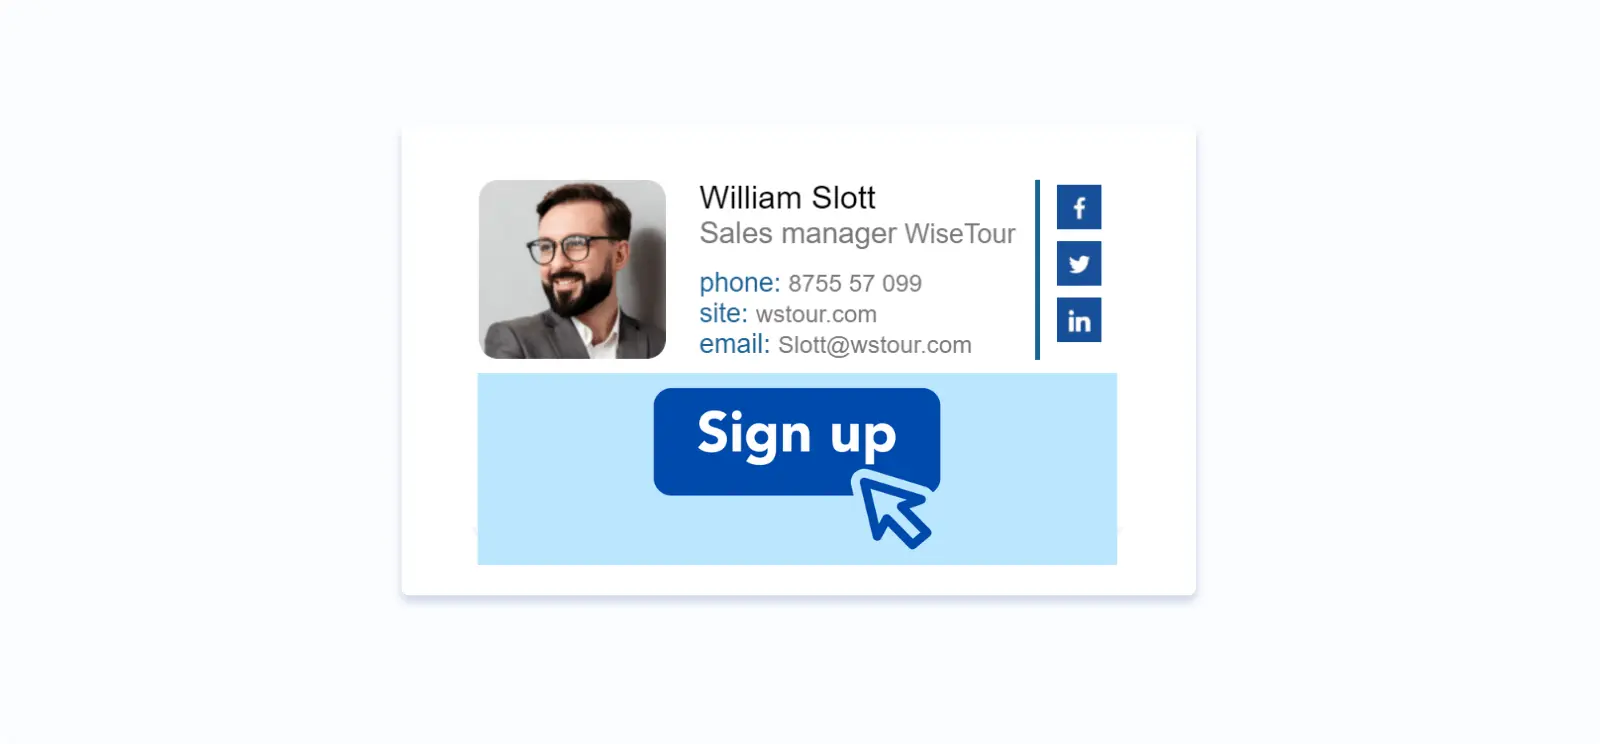 Email signature banner with no context